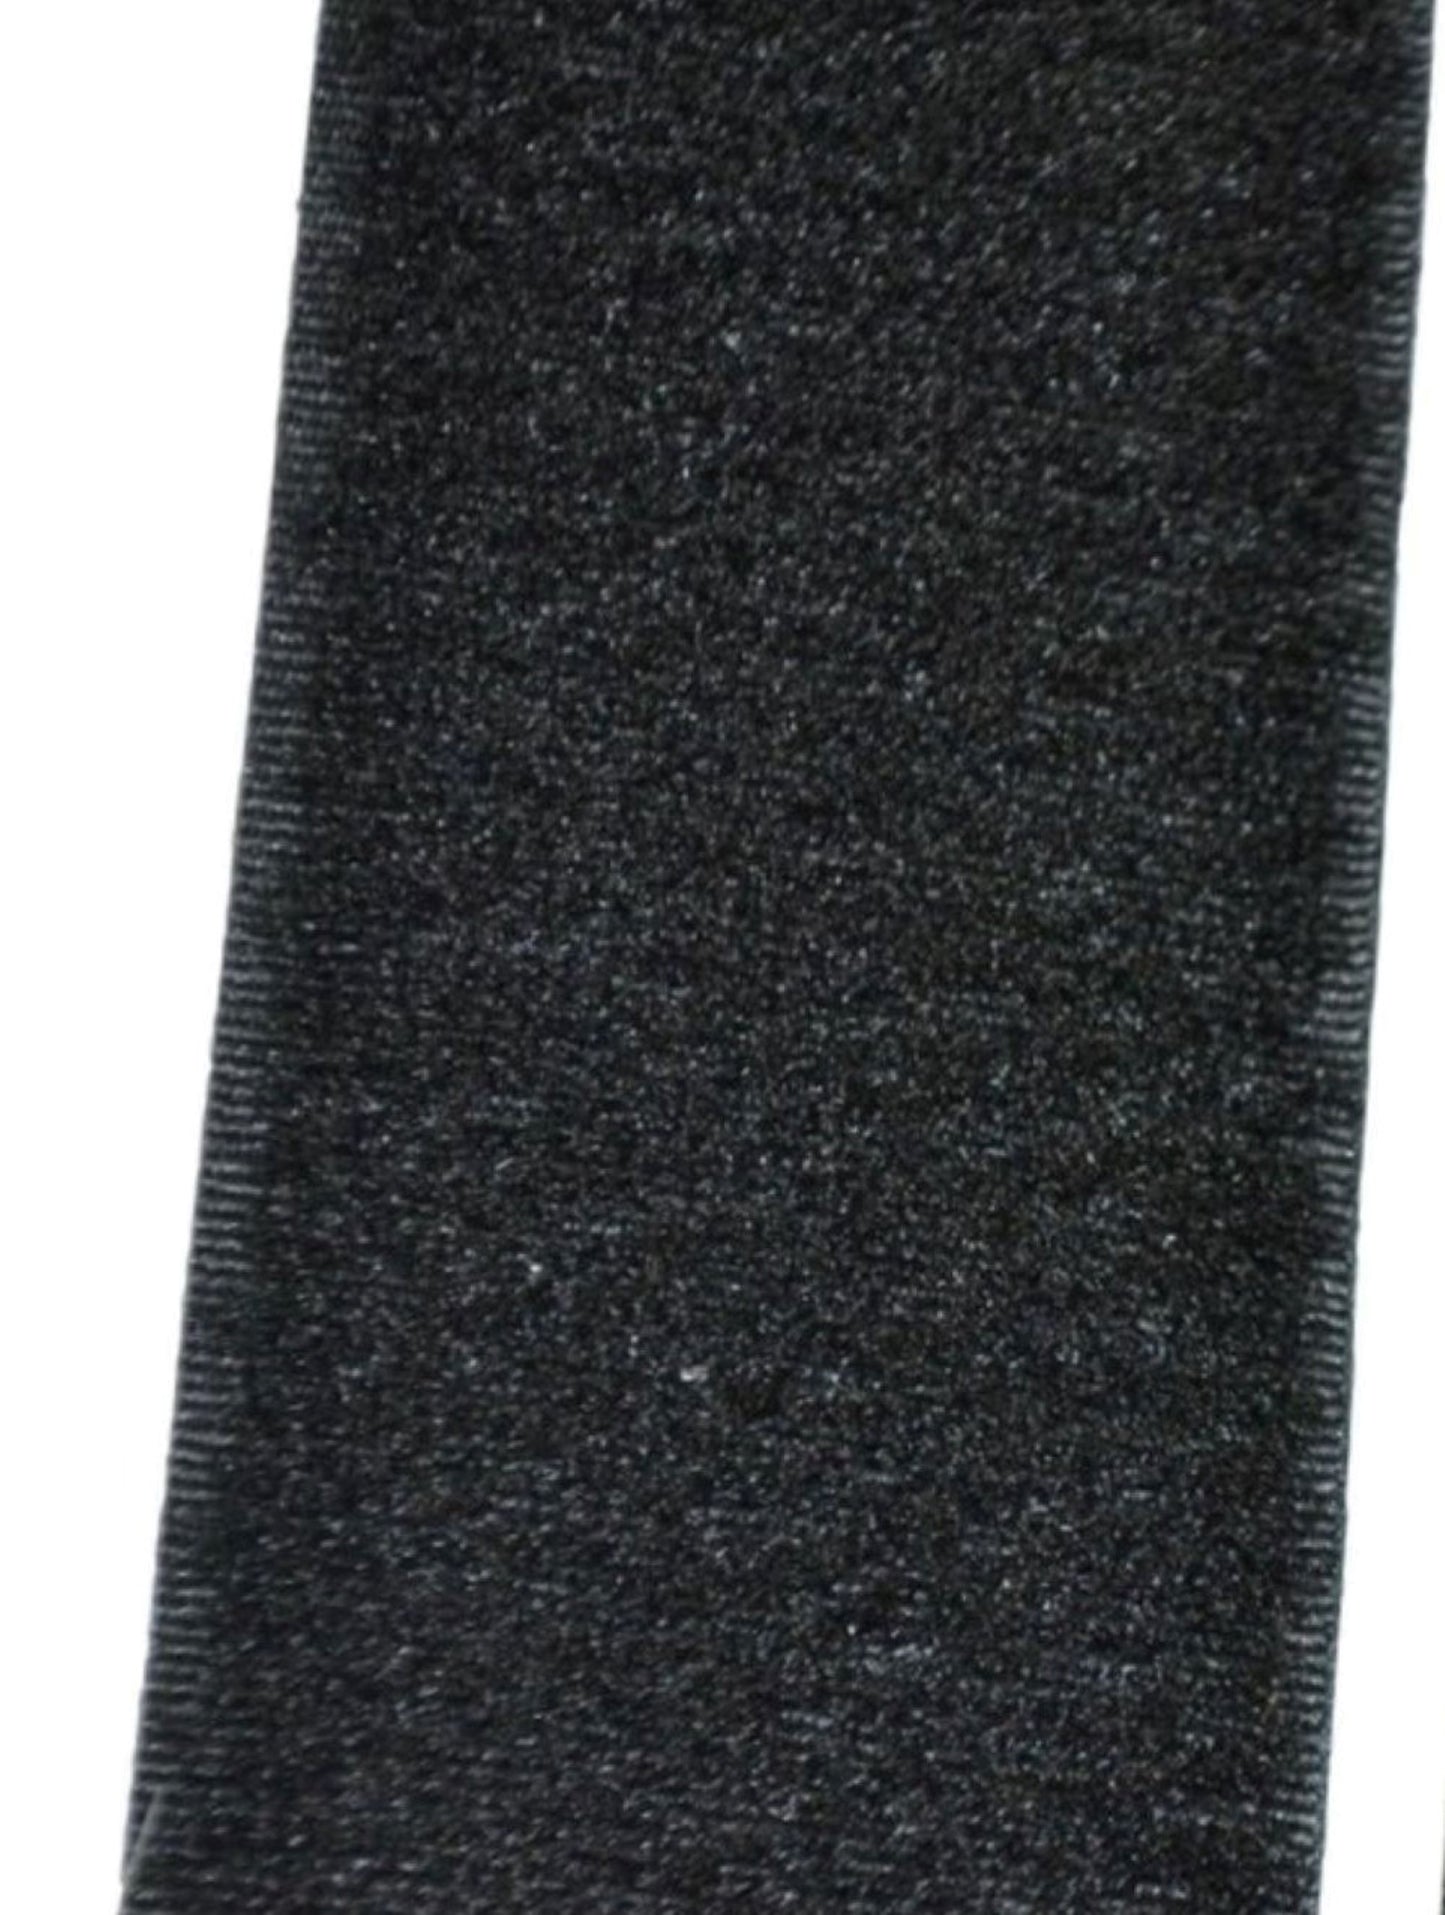 Sew On Hook and Loop For Fabric 2 Inch Wide Black, 25 Yards